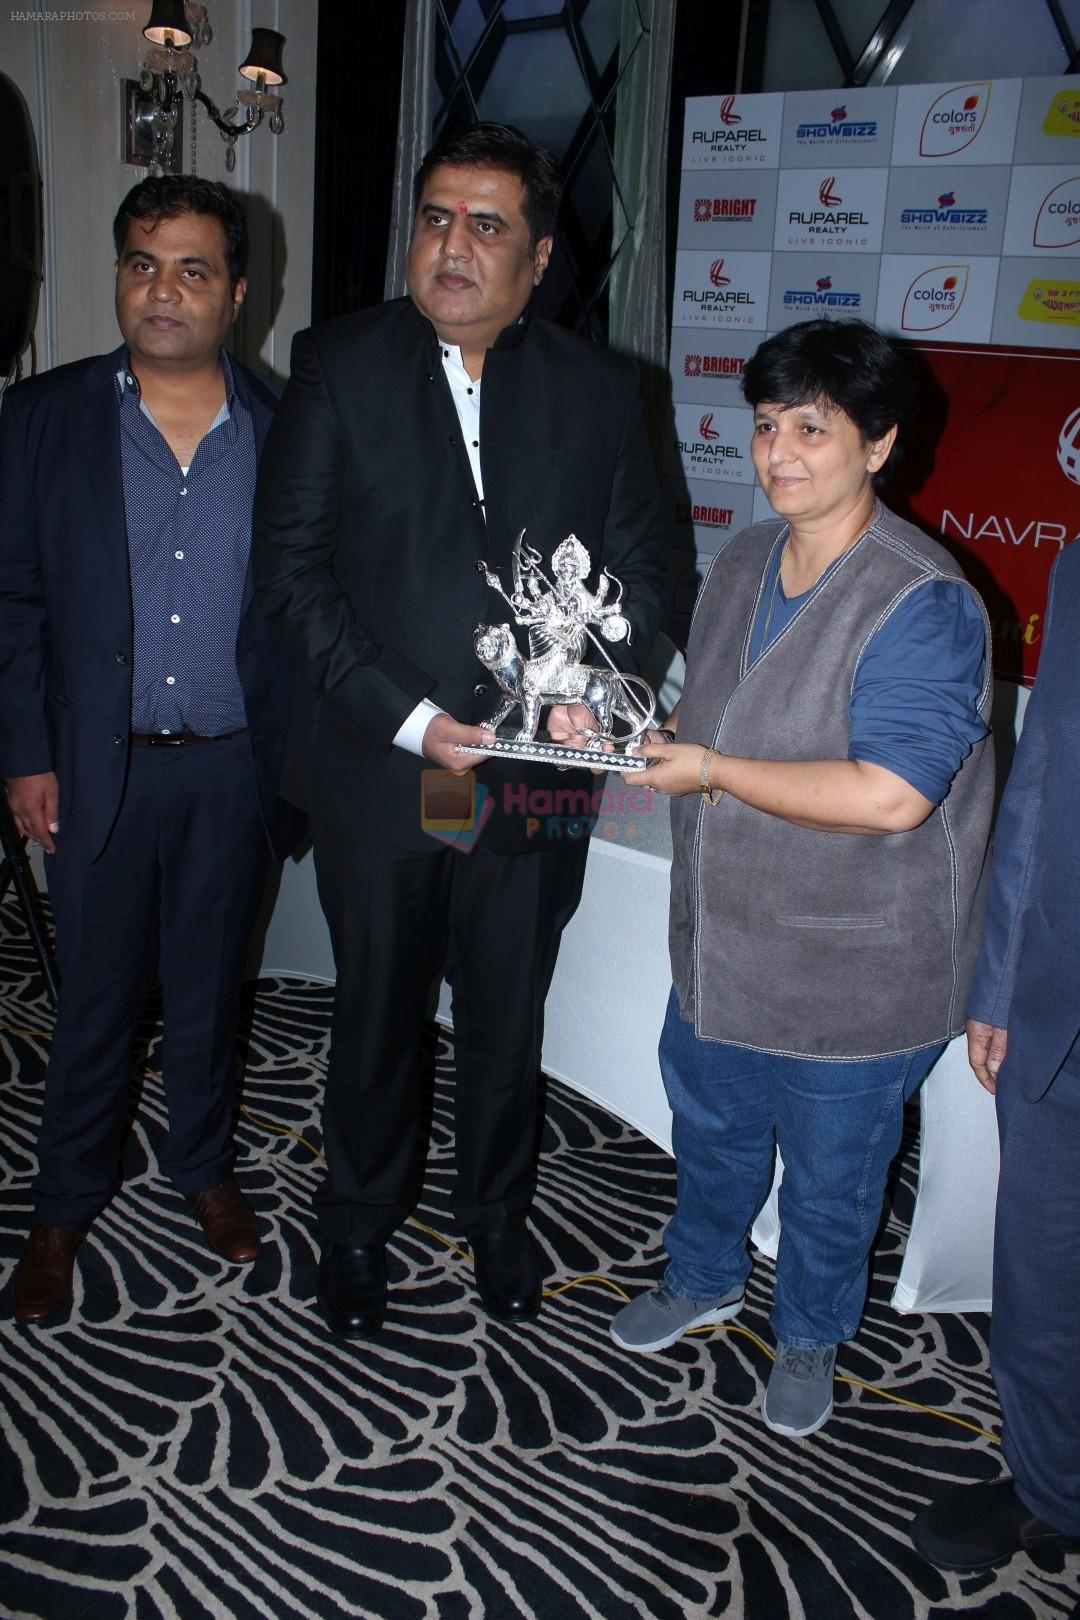 Falguni Pathak at the press conference To Announce Ruprel Reality Association on 22nd Aug 2017